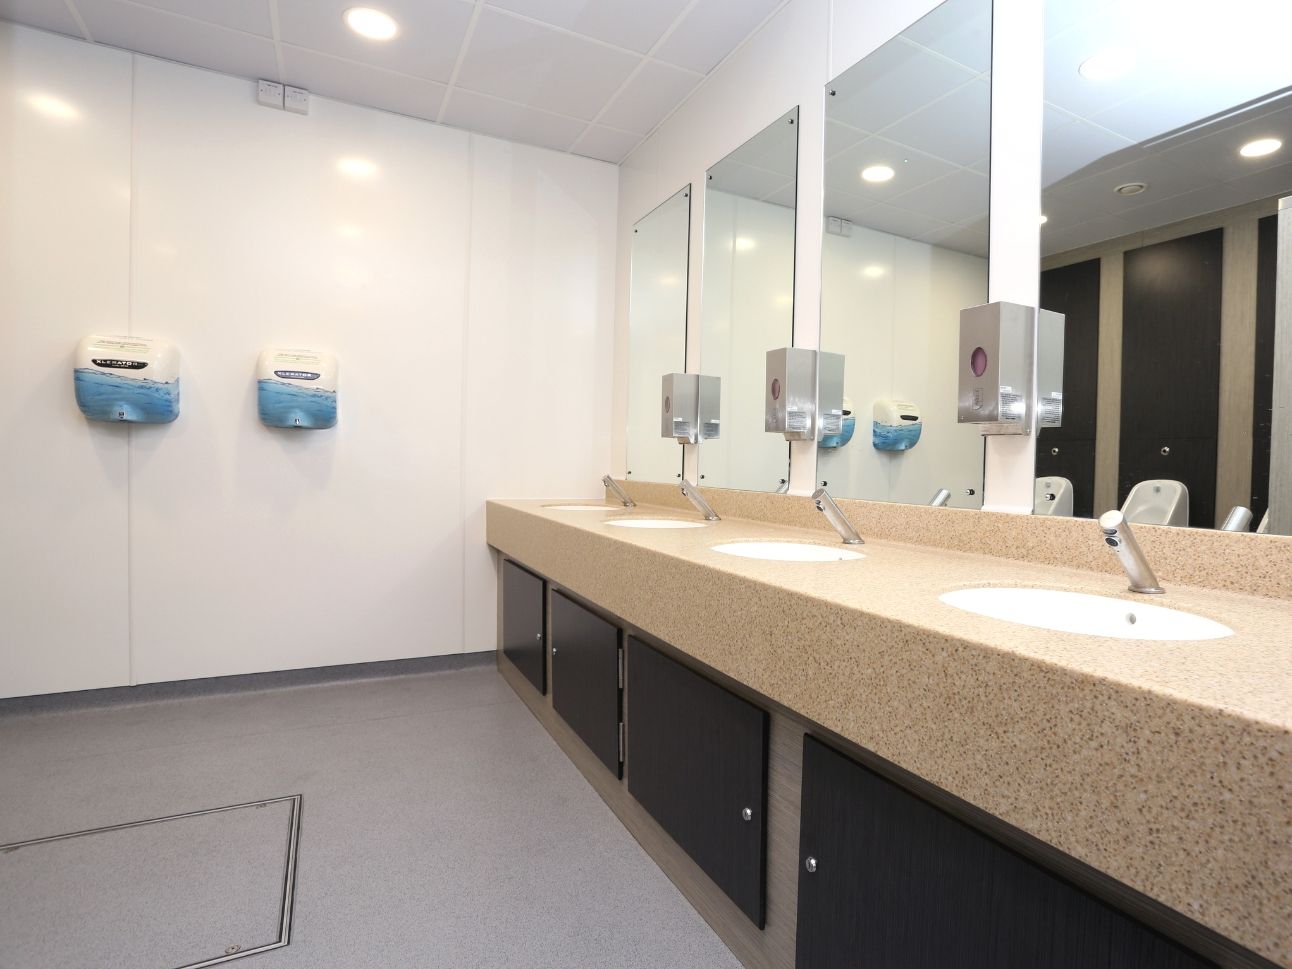 South West Water Toilet Refurbishment | Case Study